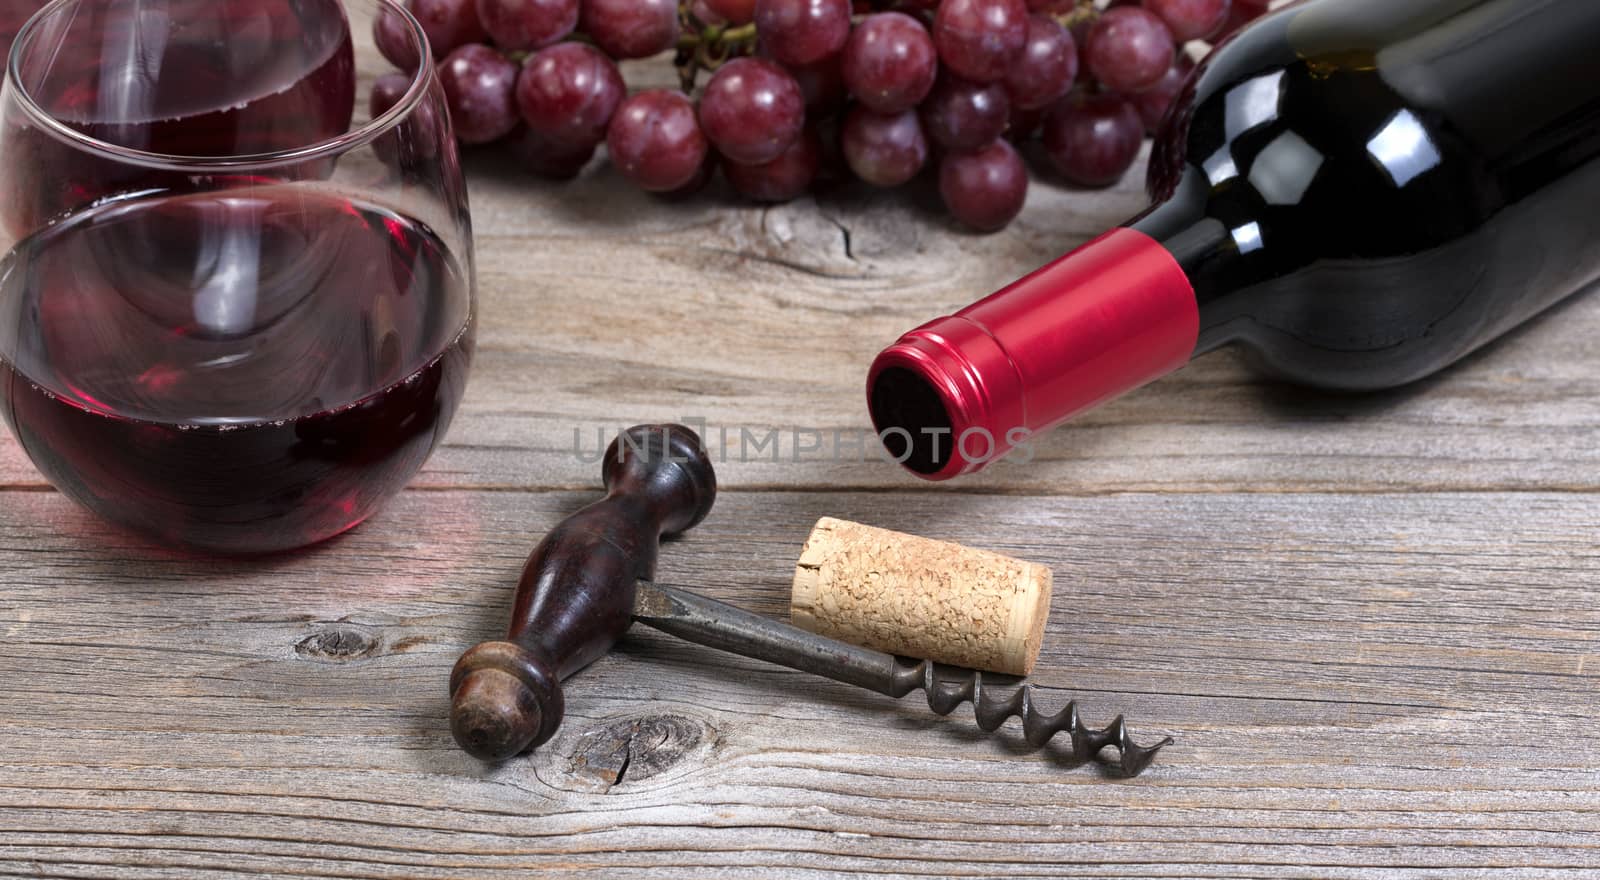 Selective focus on vintage corkscrew with a bottle of red wine, grapes, and drinking glasses in background on rustic wooden boards